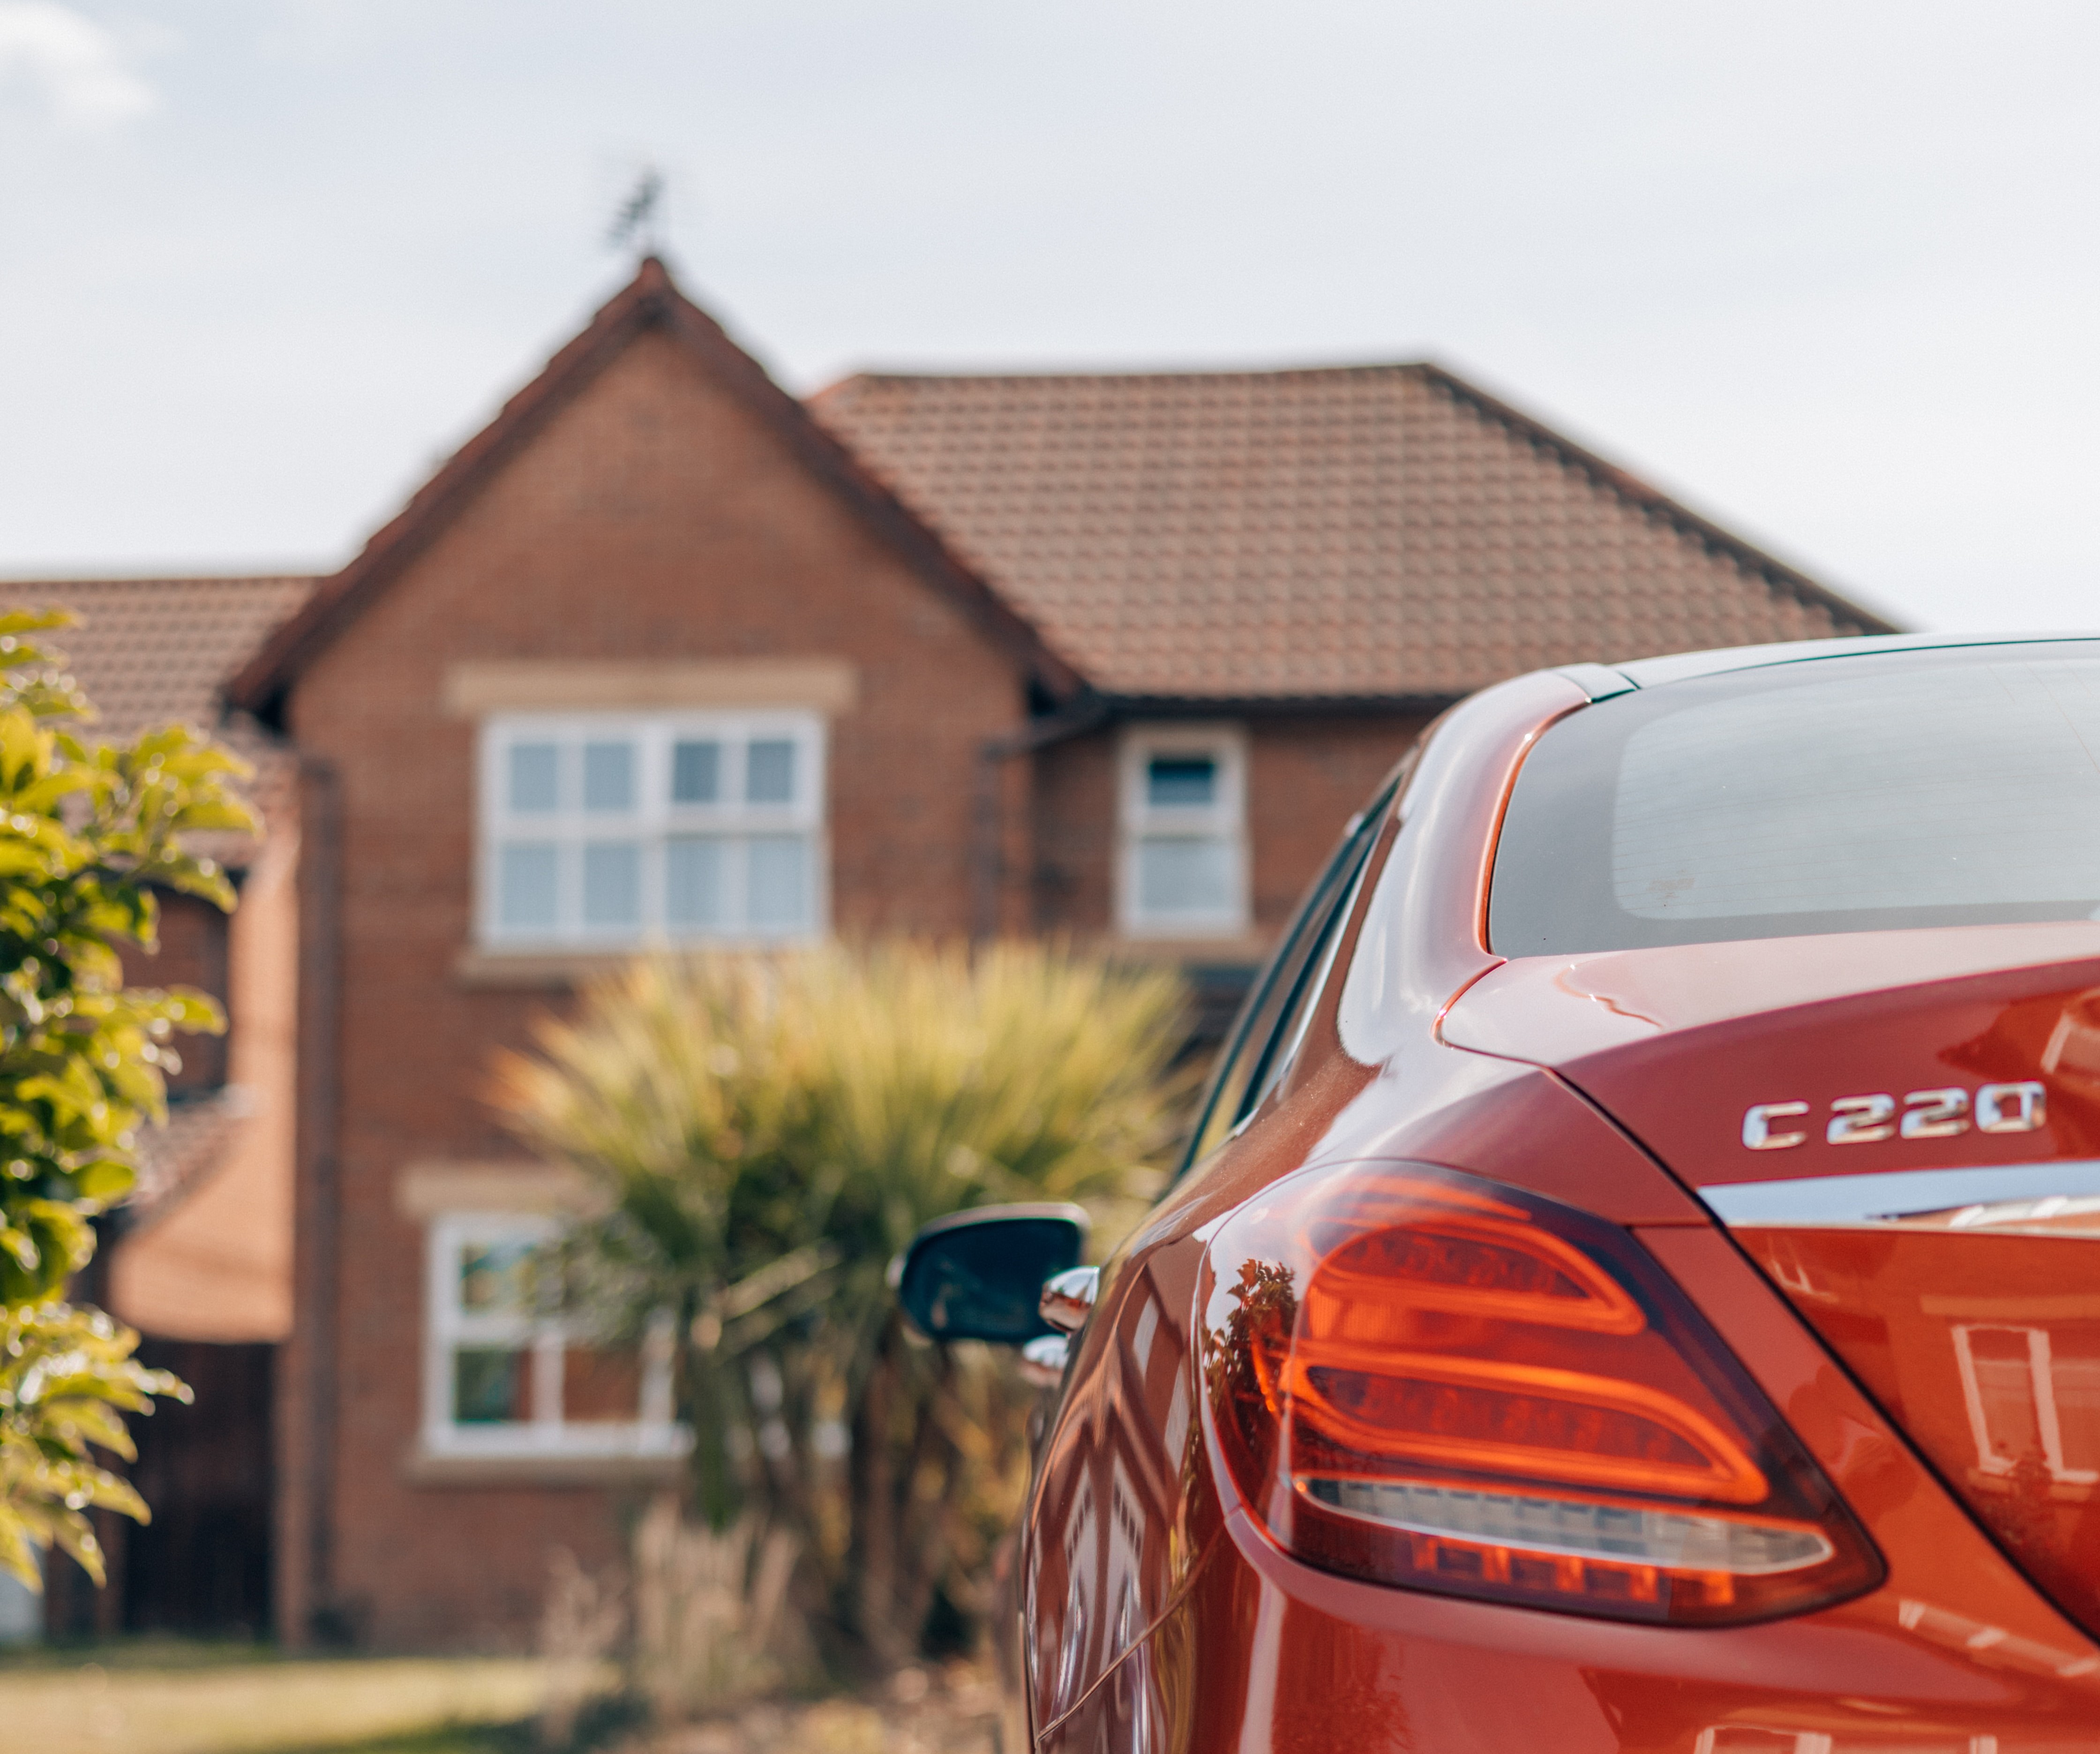 Leave your car warming up in your driveway? That could cost you big time